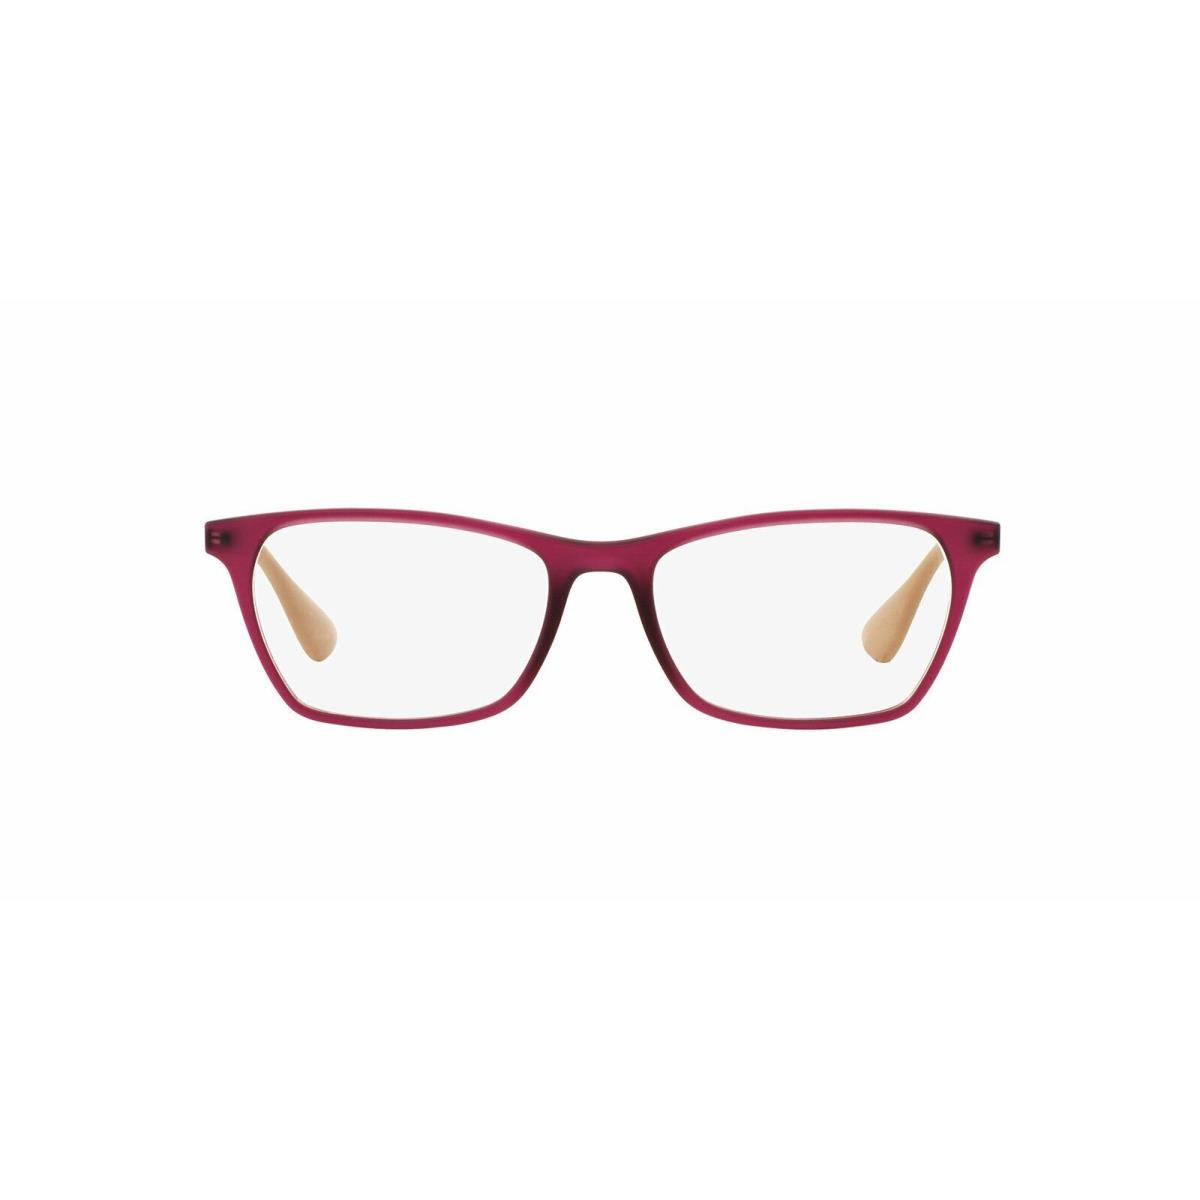 Ray-ban Ray Ban Eyeglasses RB7053 5526 Red 52mm Rx-able ST